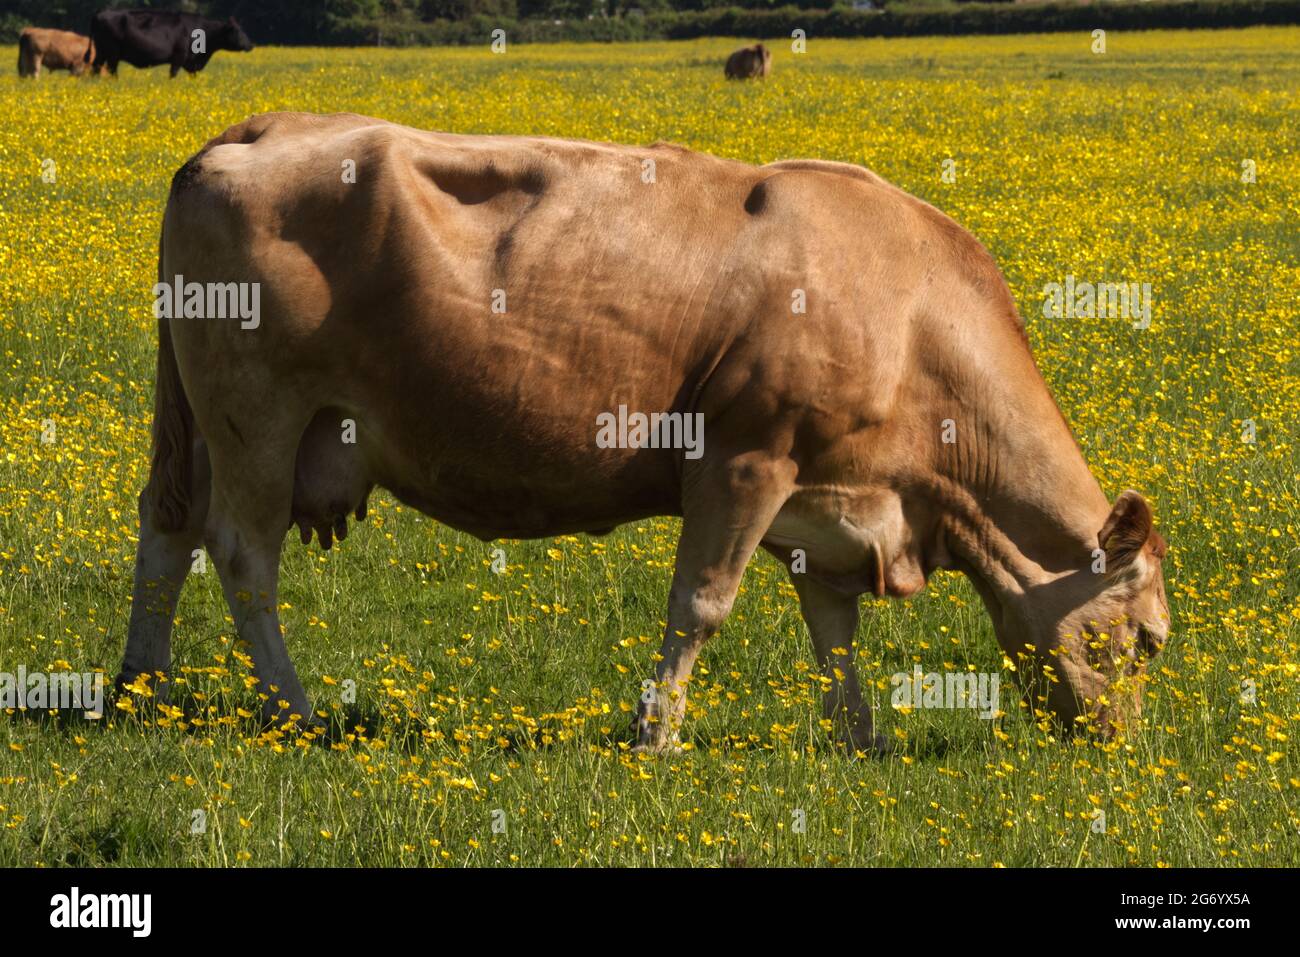 Dairy cow in a buttercup field Stock Photo